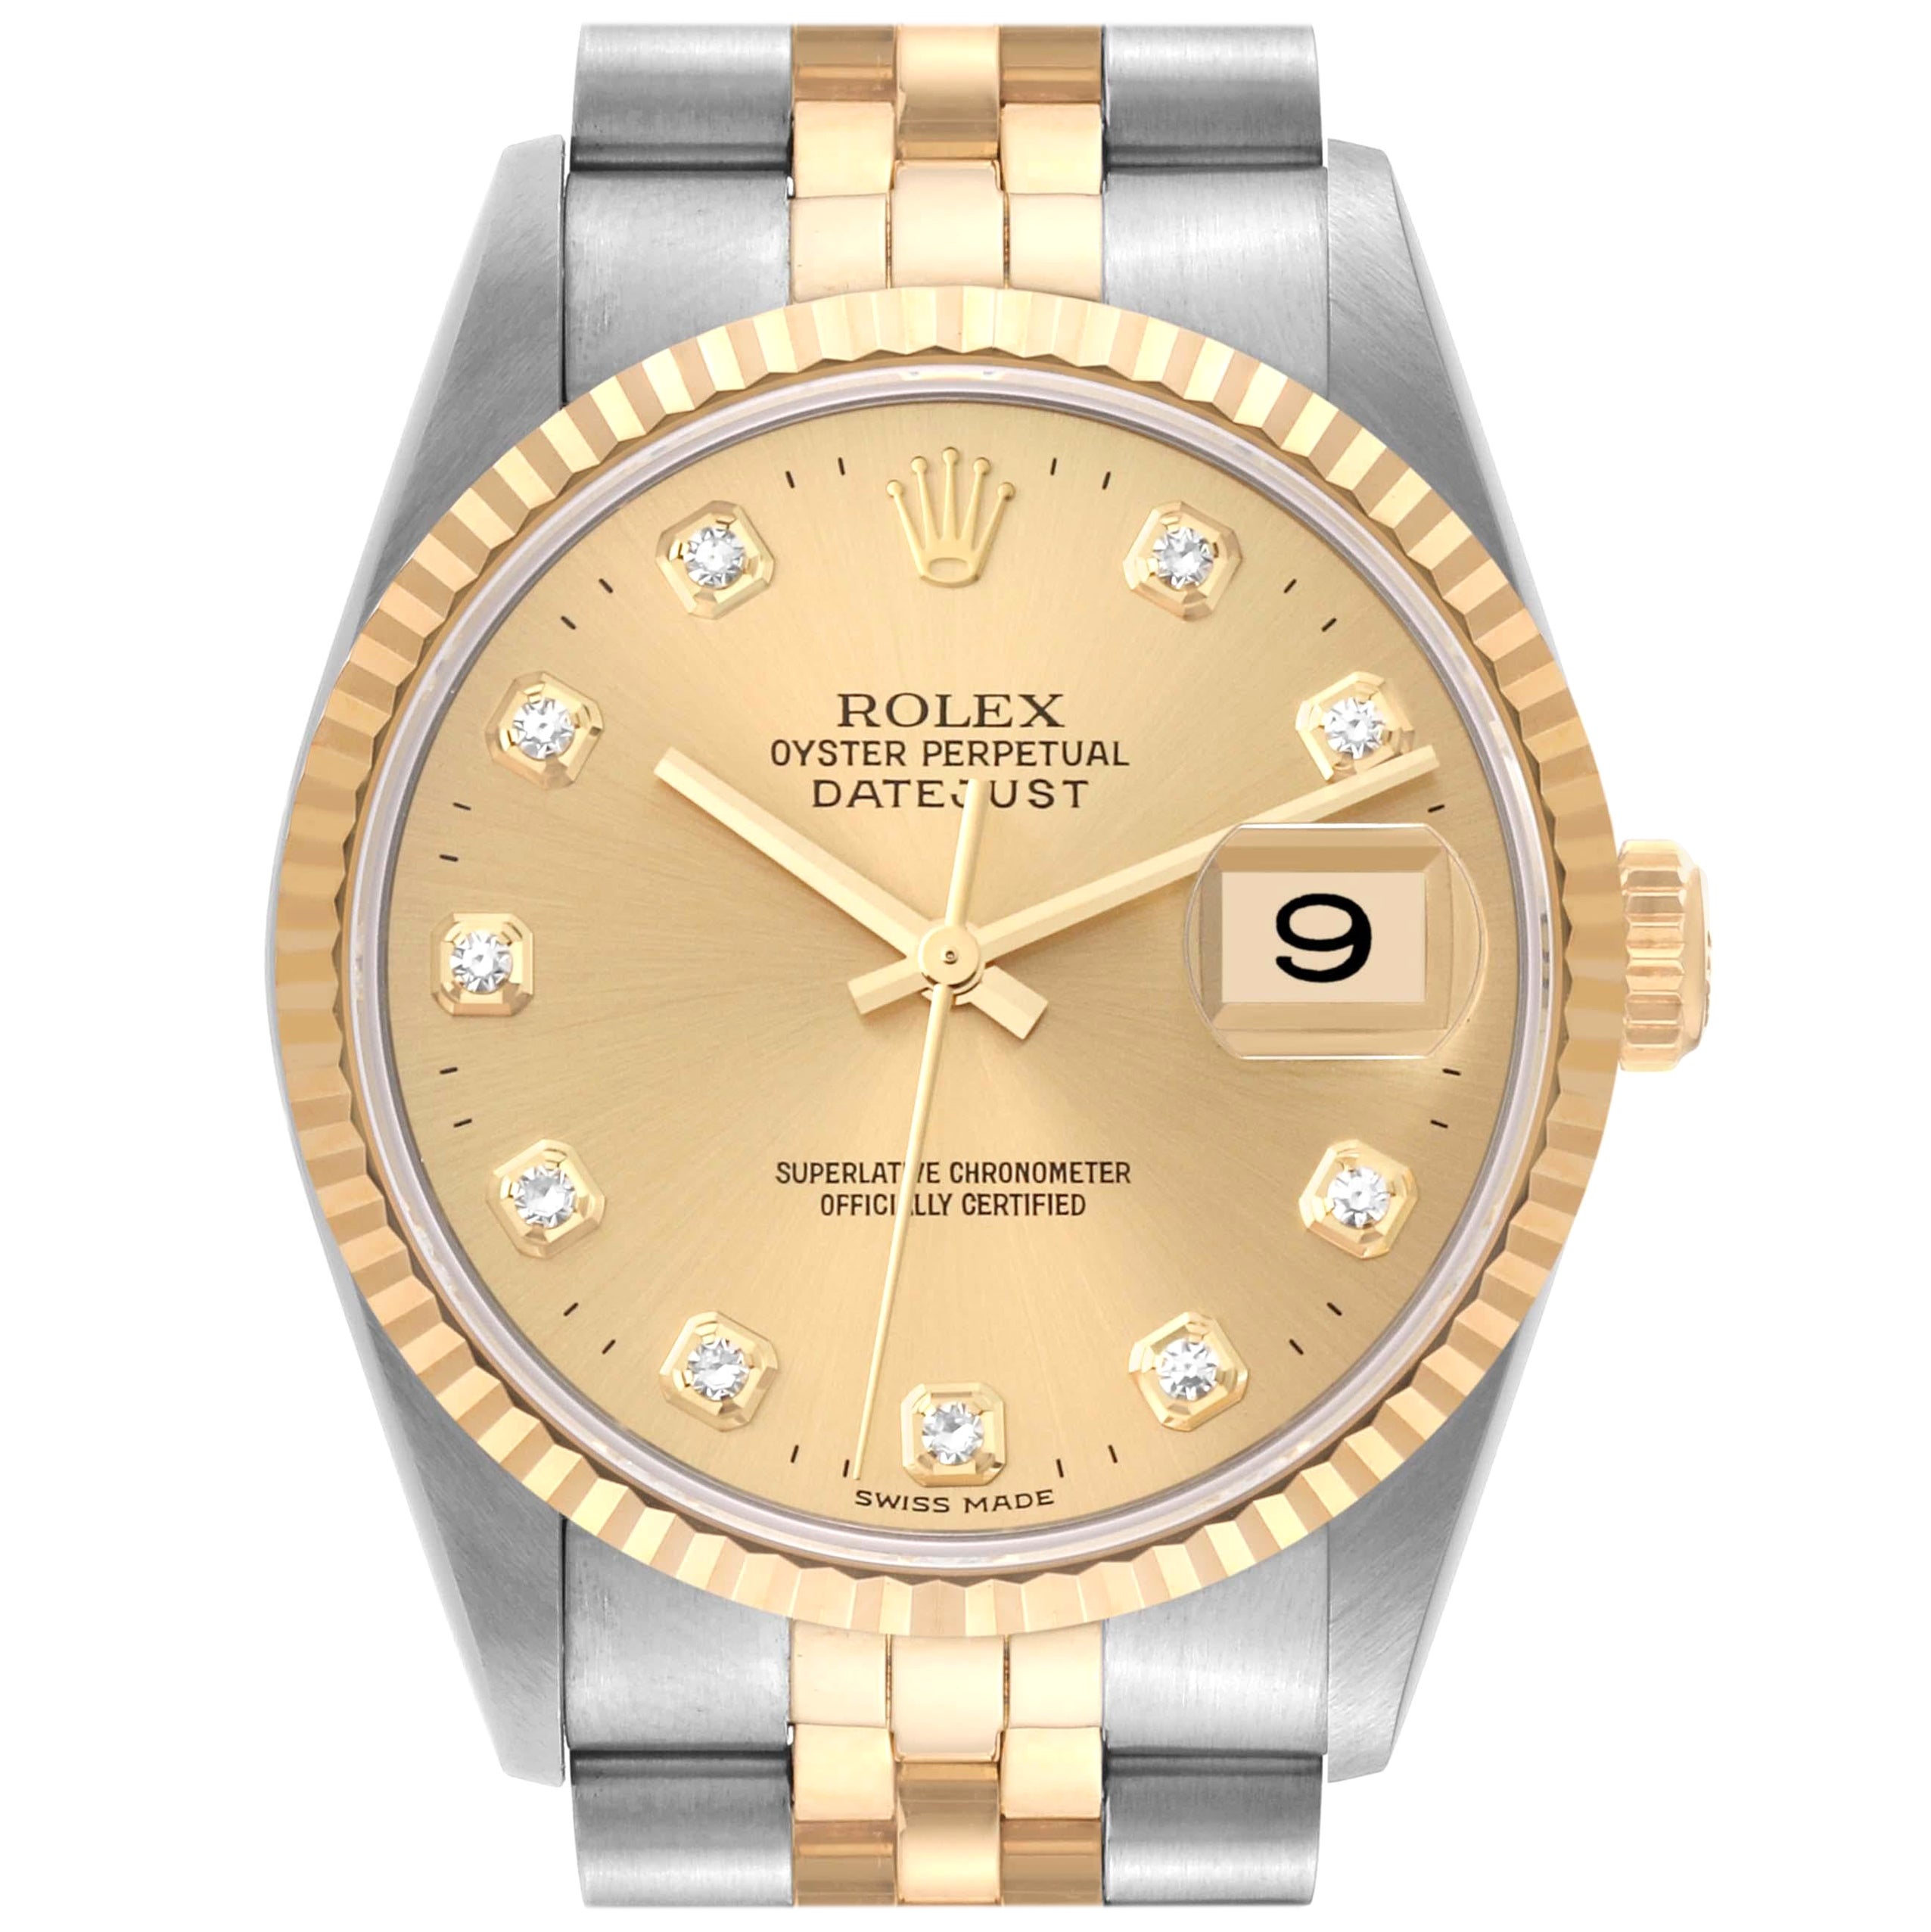 Why are Rolex watches so valuable?